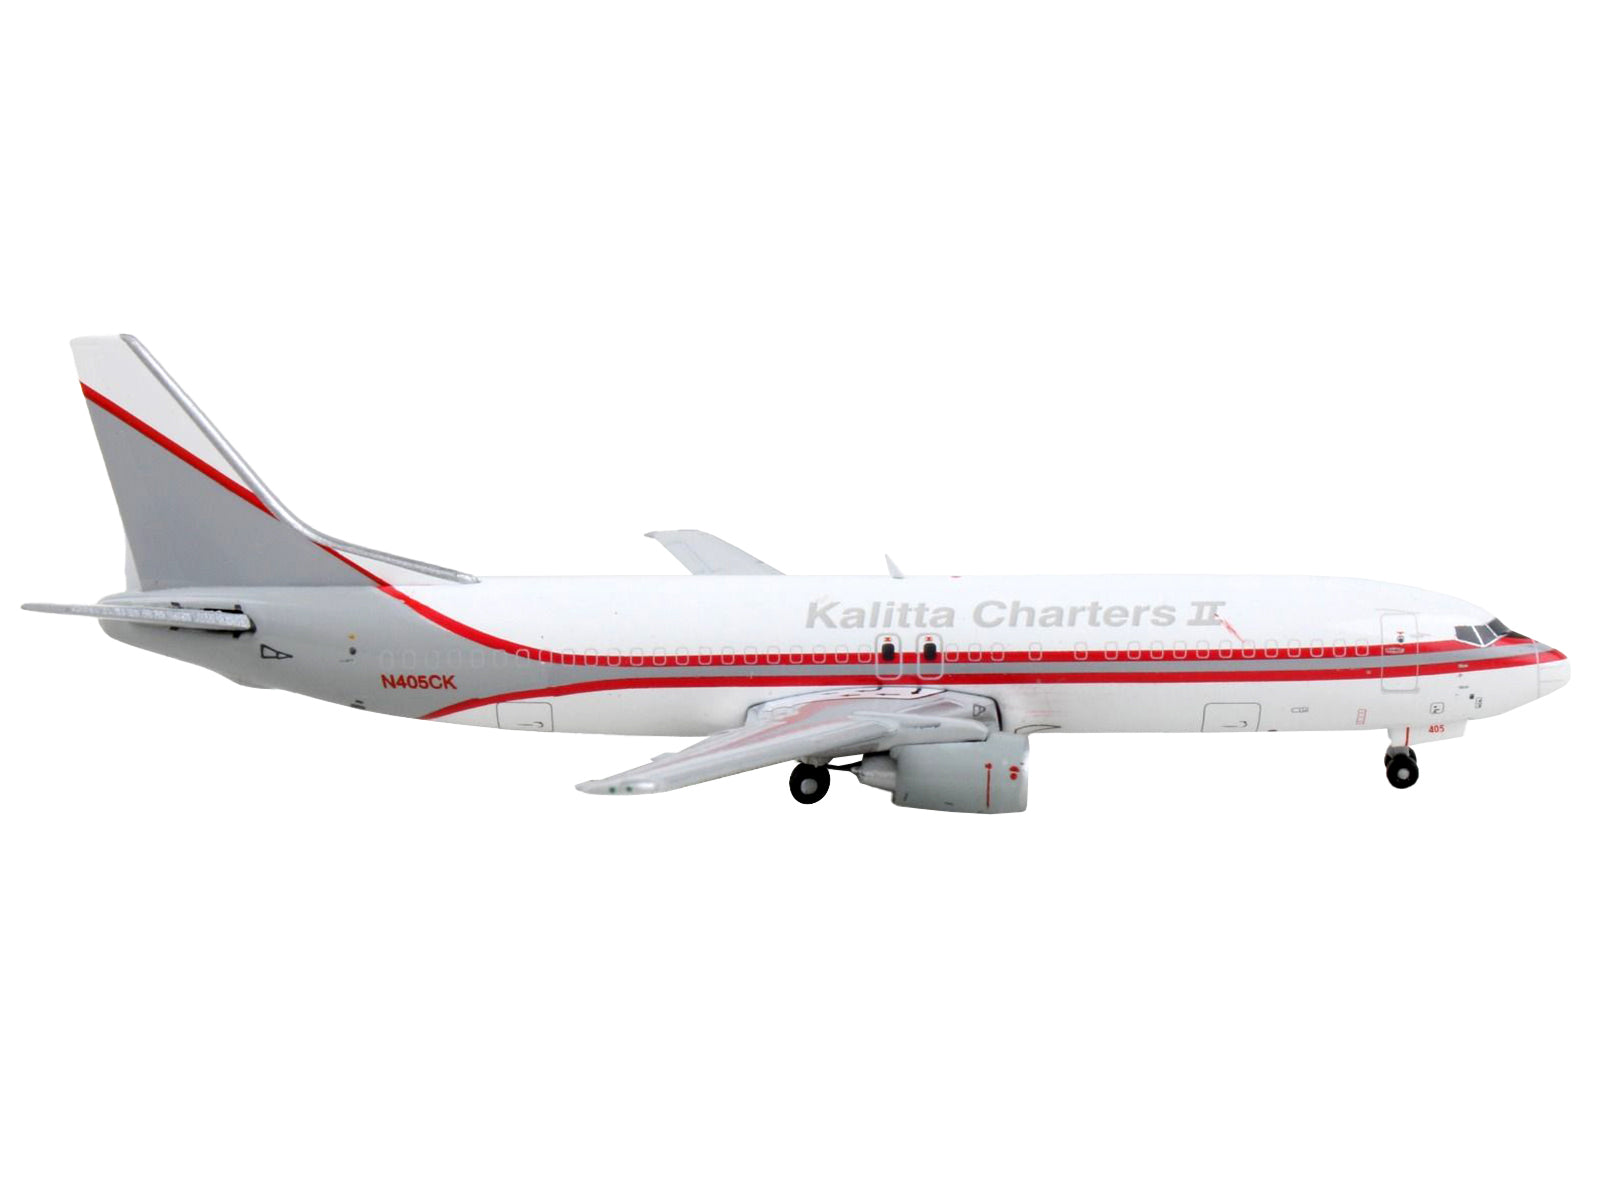 Boeing 737-400F Commercial Aircraft "Kalitta Charters II" White and Gray with Red Stripes 1/400 Diecast Model Airplane by GeminiJets